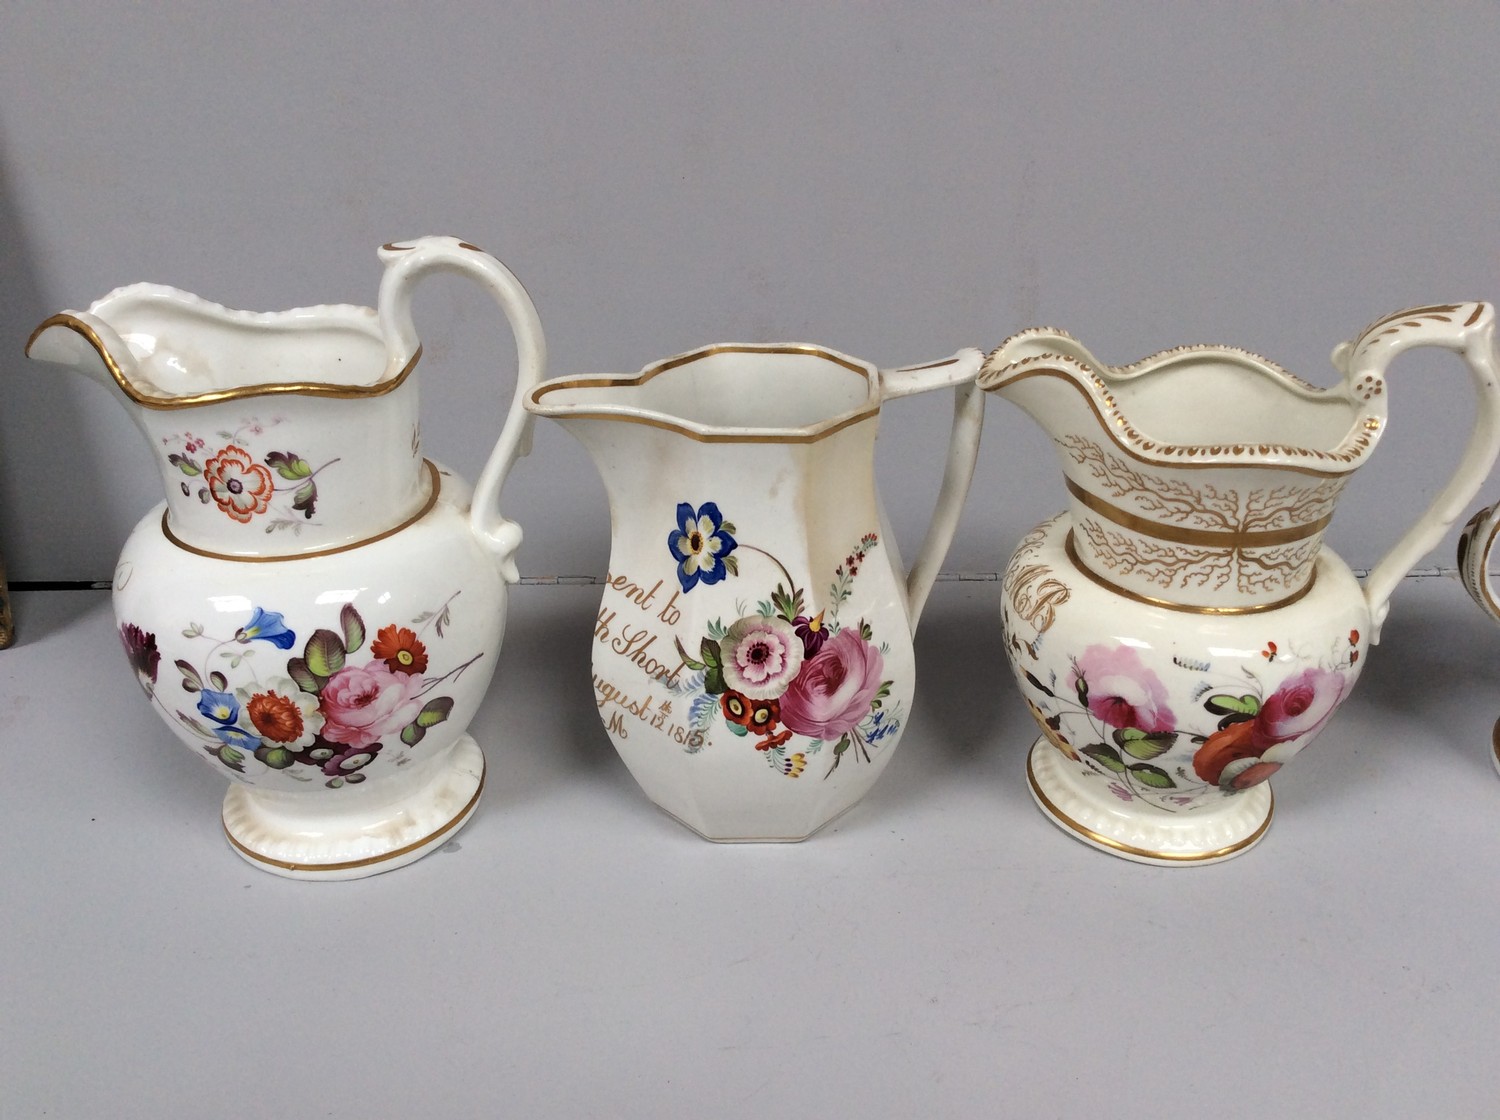 An early 19th century Staffordshire porcelain two-handled loving cup painted with roses and gilt - Image 5 of 5